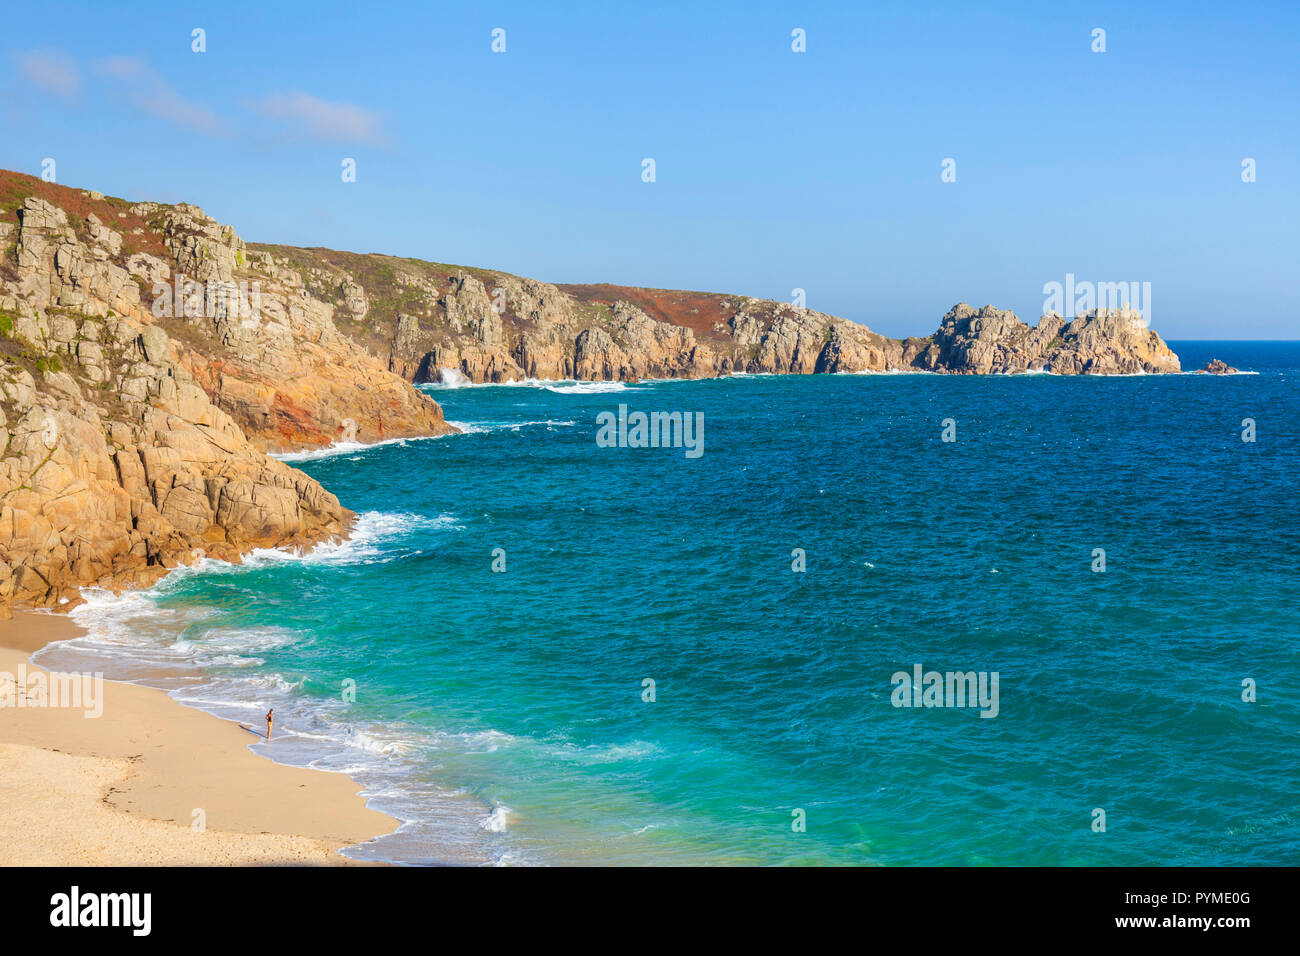 Cornwall Porthcurno beach One swimmer braving the cold water to swim from Porthcurno Cornwall England UK GB Europe Stock Photo